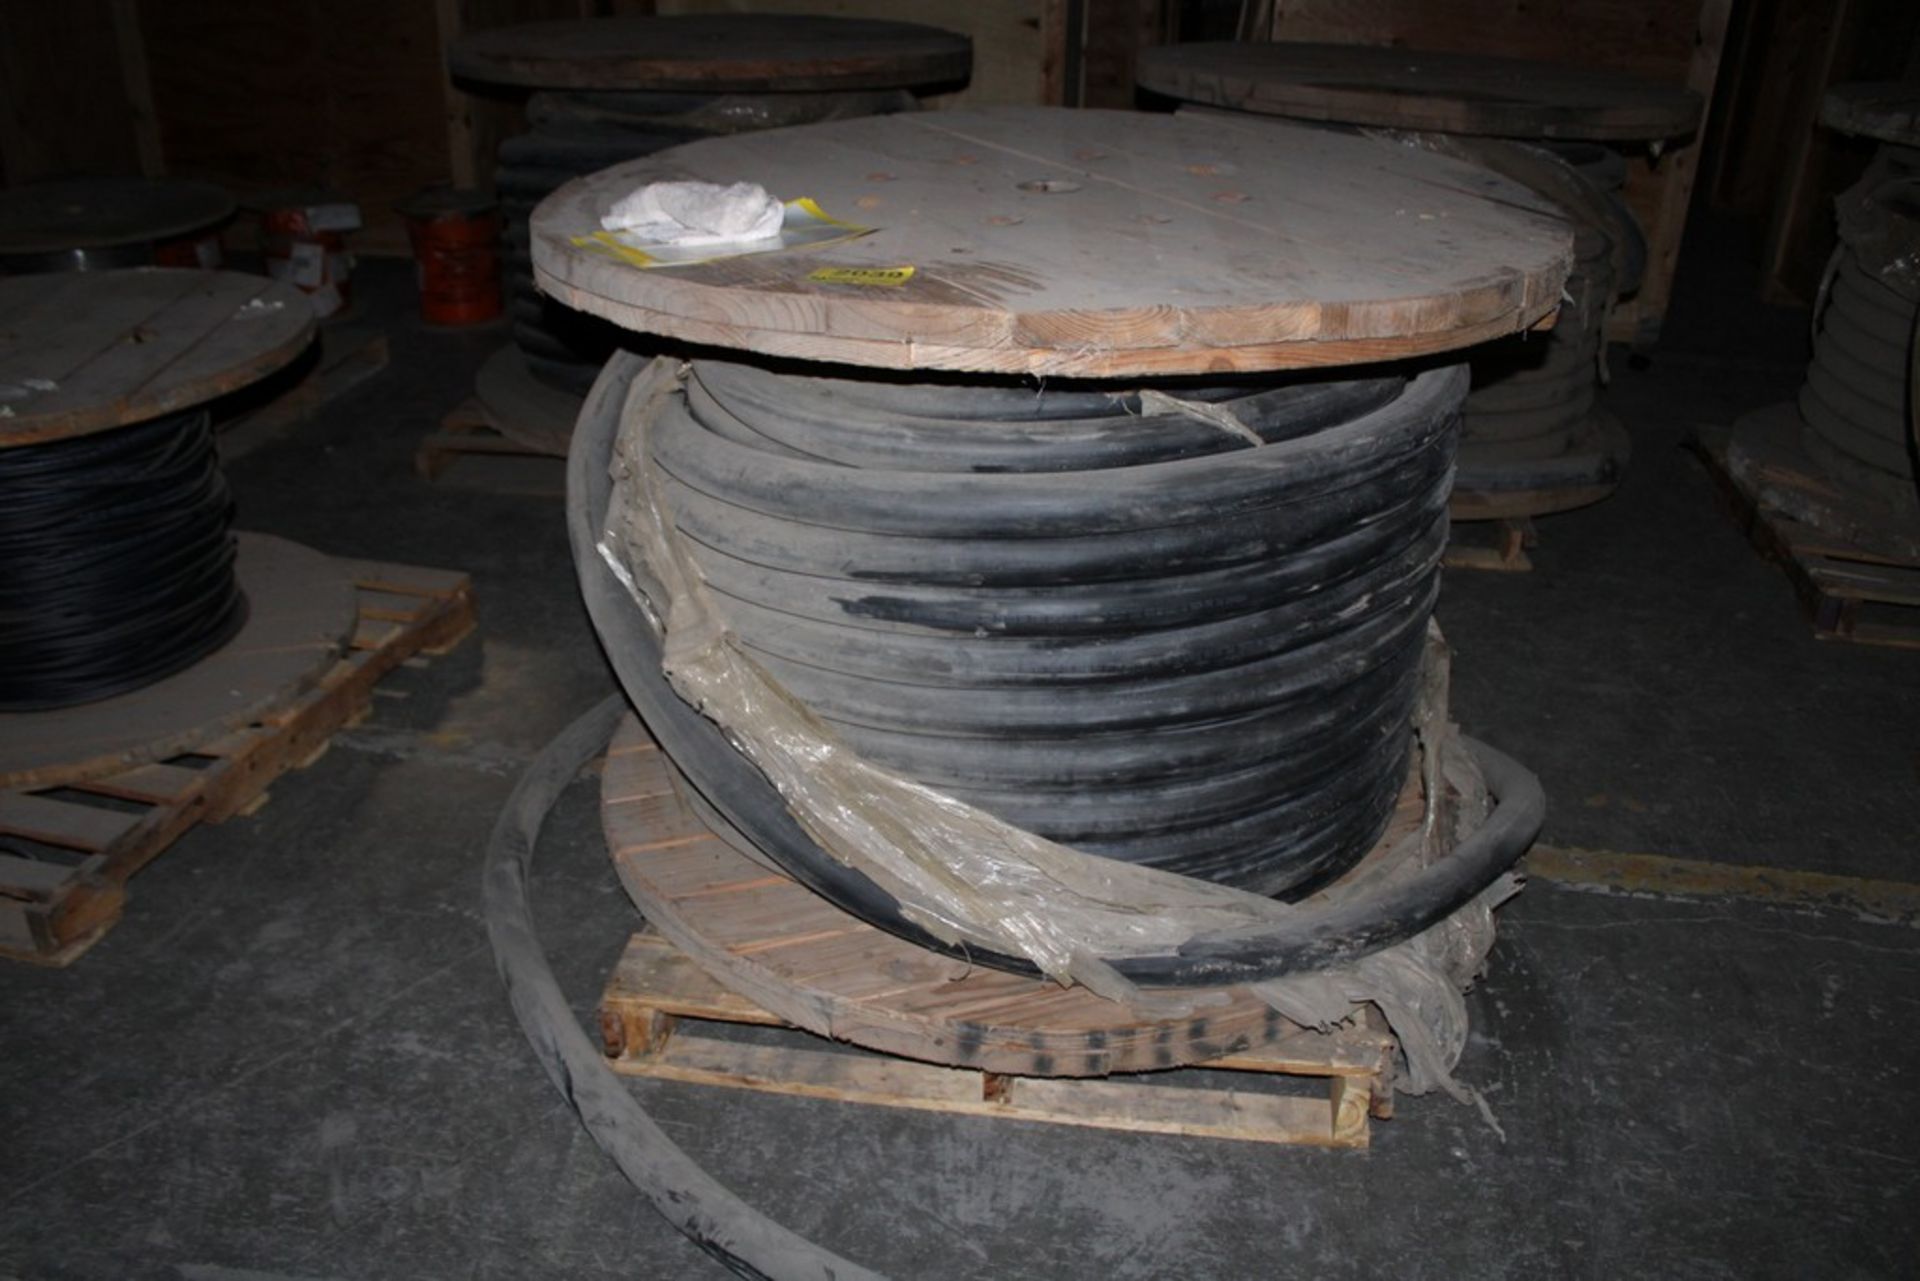 THREE STRAND HEAVY GAUGE SPOOL OF WIRE, 262KCMIL 3/C 5KV SHLD REINFORCES, APPROX. 325FT.